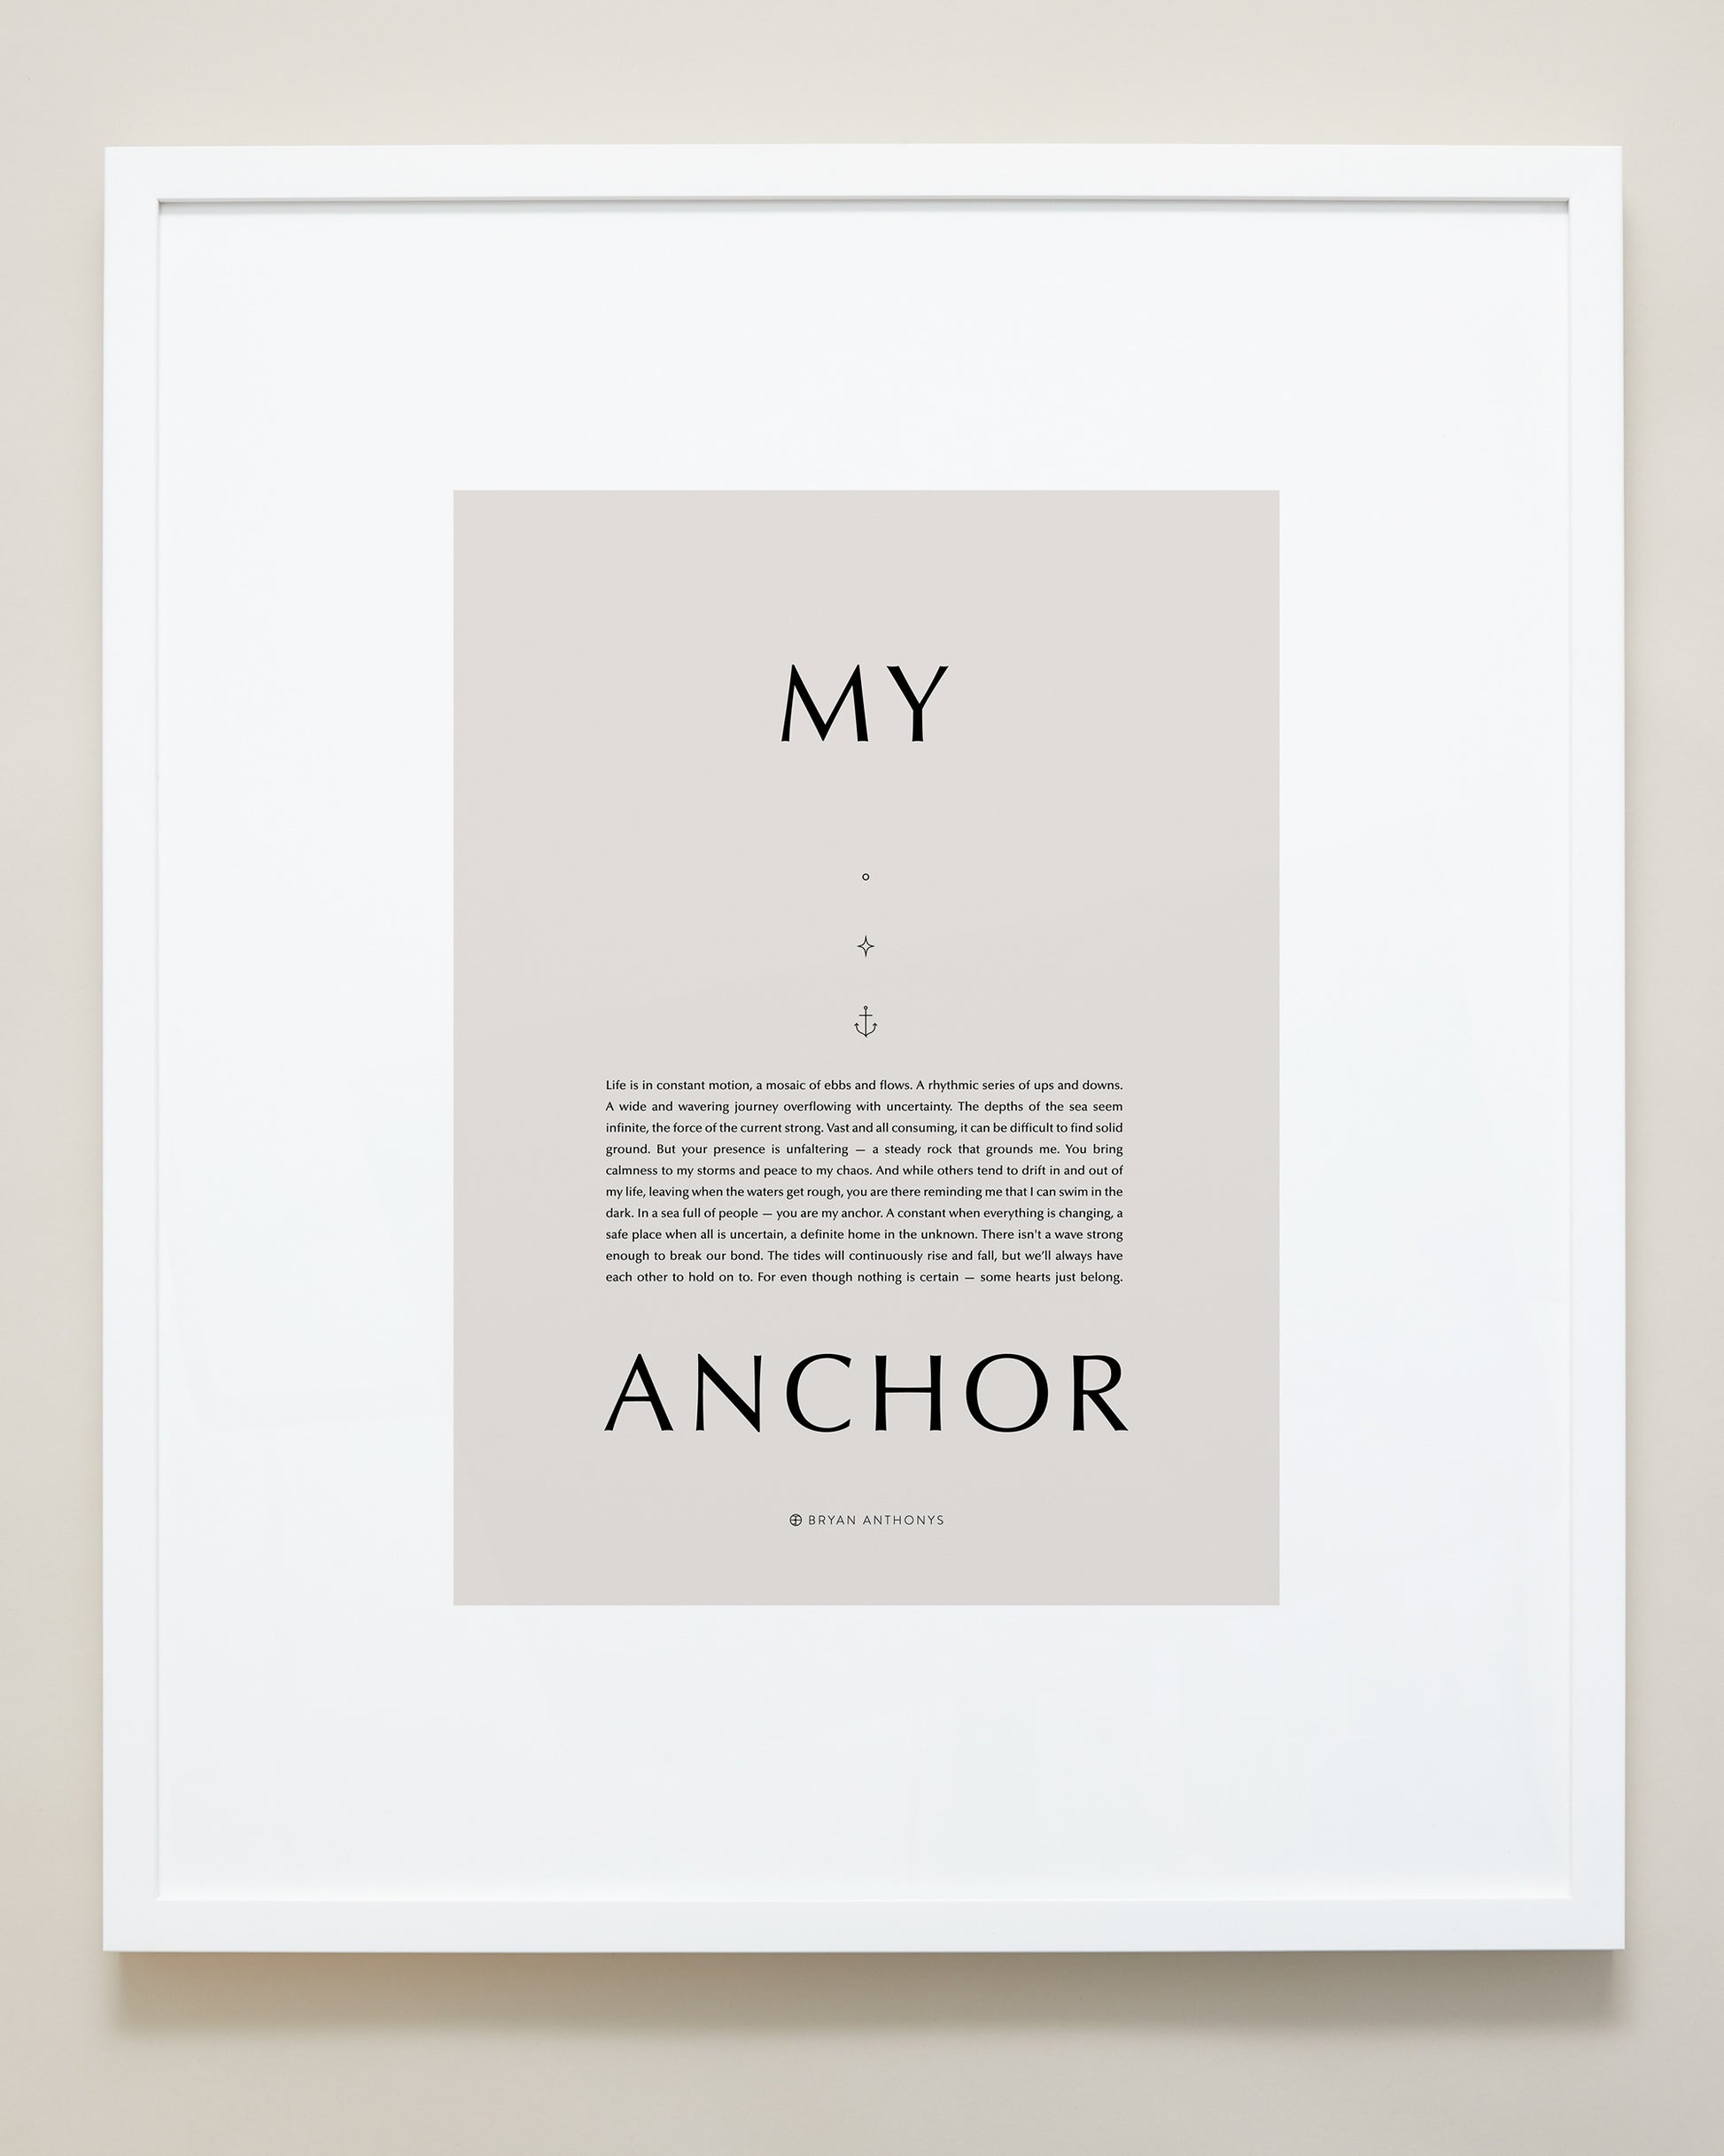 Bryan Anthonys Home Decor Purposeful Prints My Anchor Iconic Framed Print Tan Art With White Frame 20x24